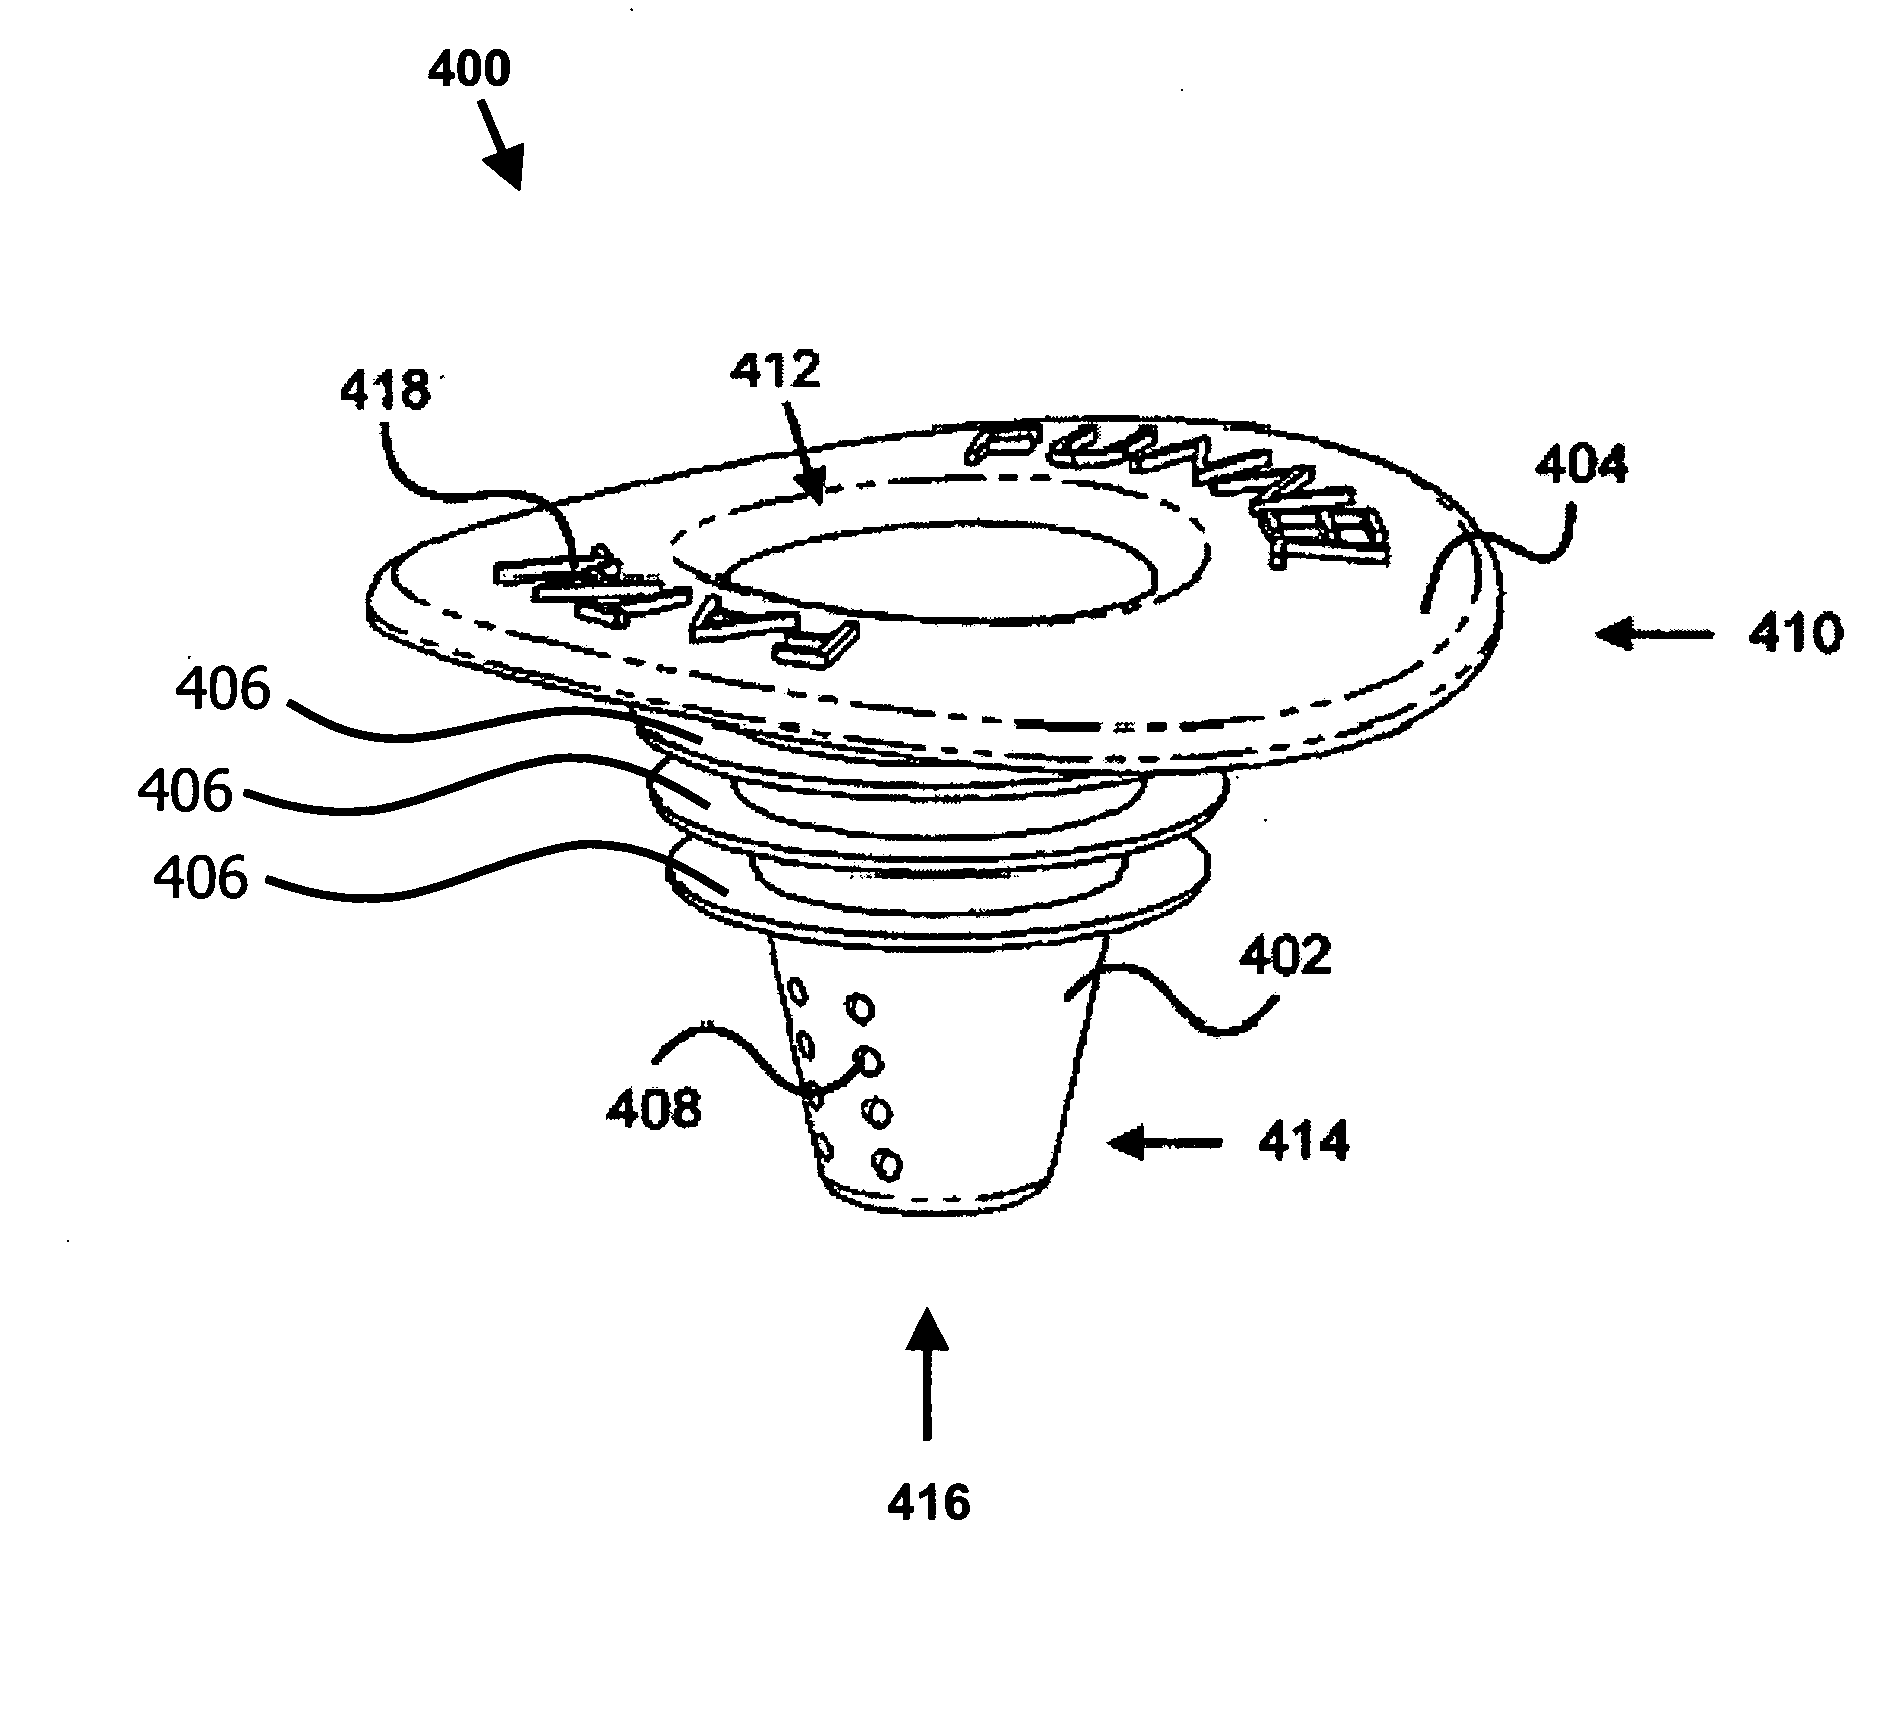 Insertable pest catching device